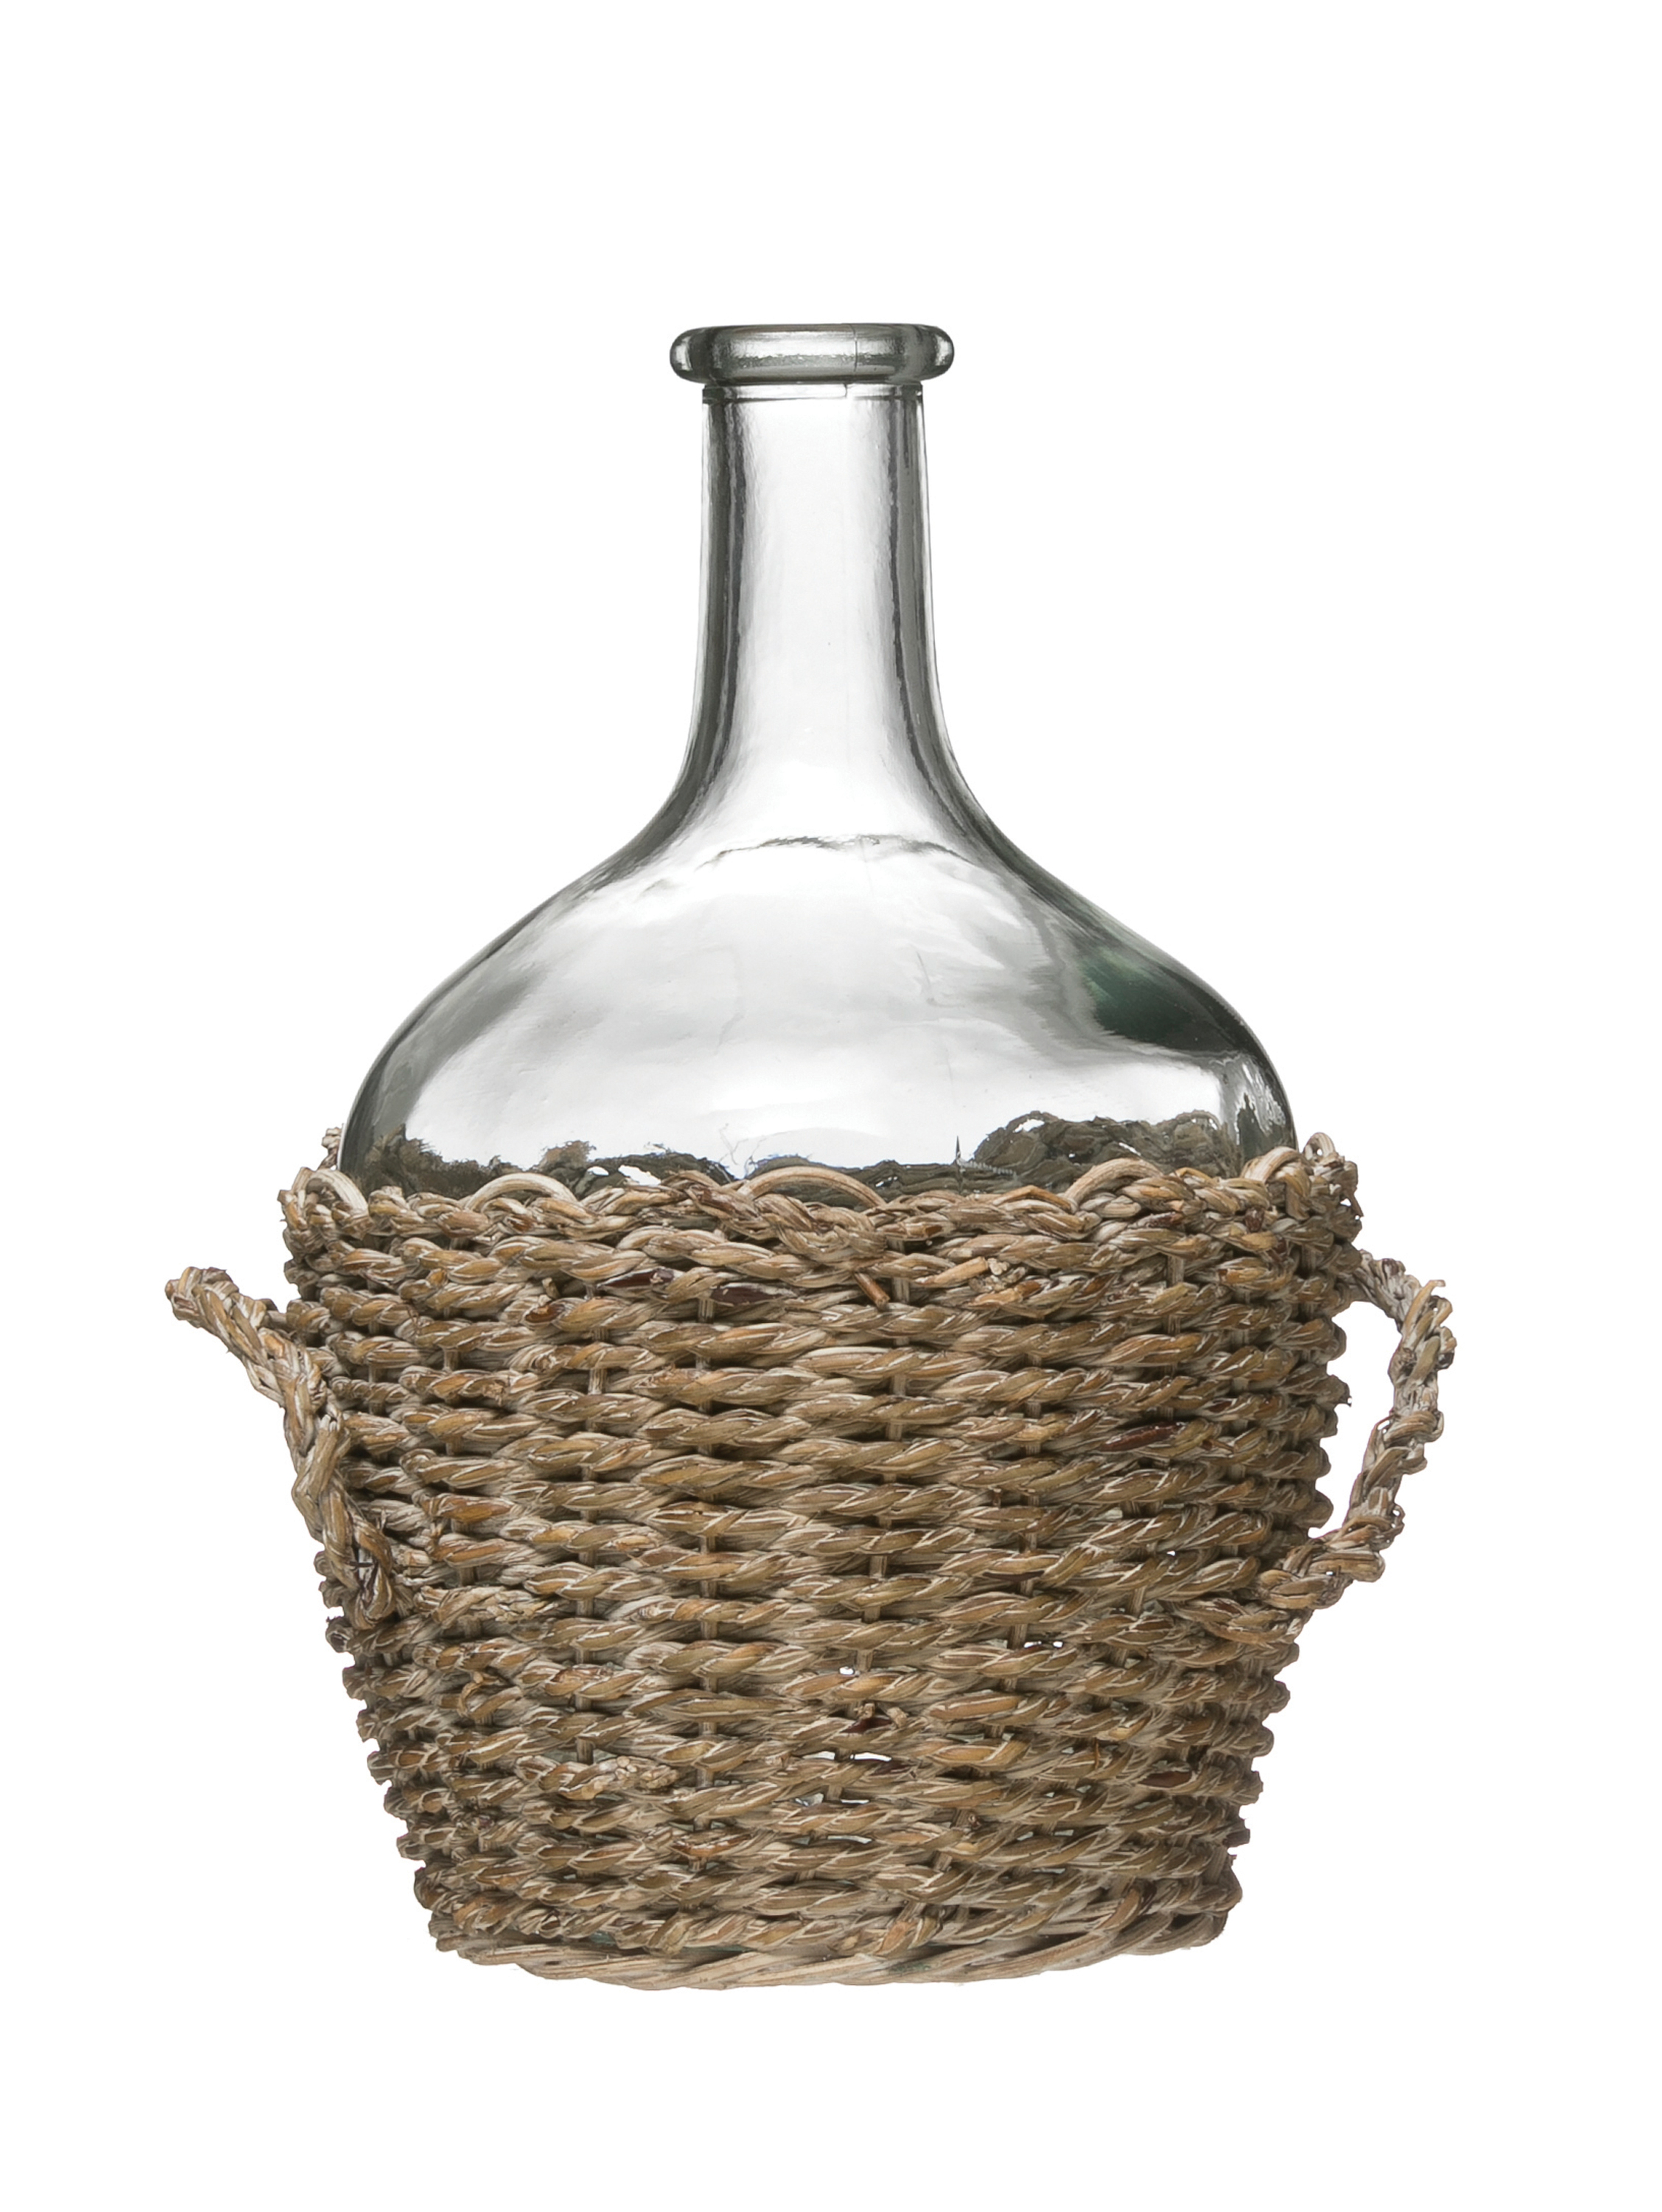 Glass Bottle in Woven Seagrass Basket with Handles - Nomad Home